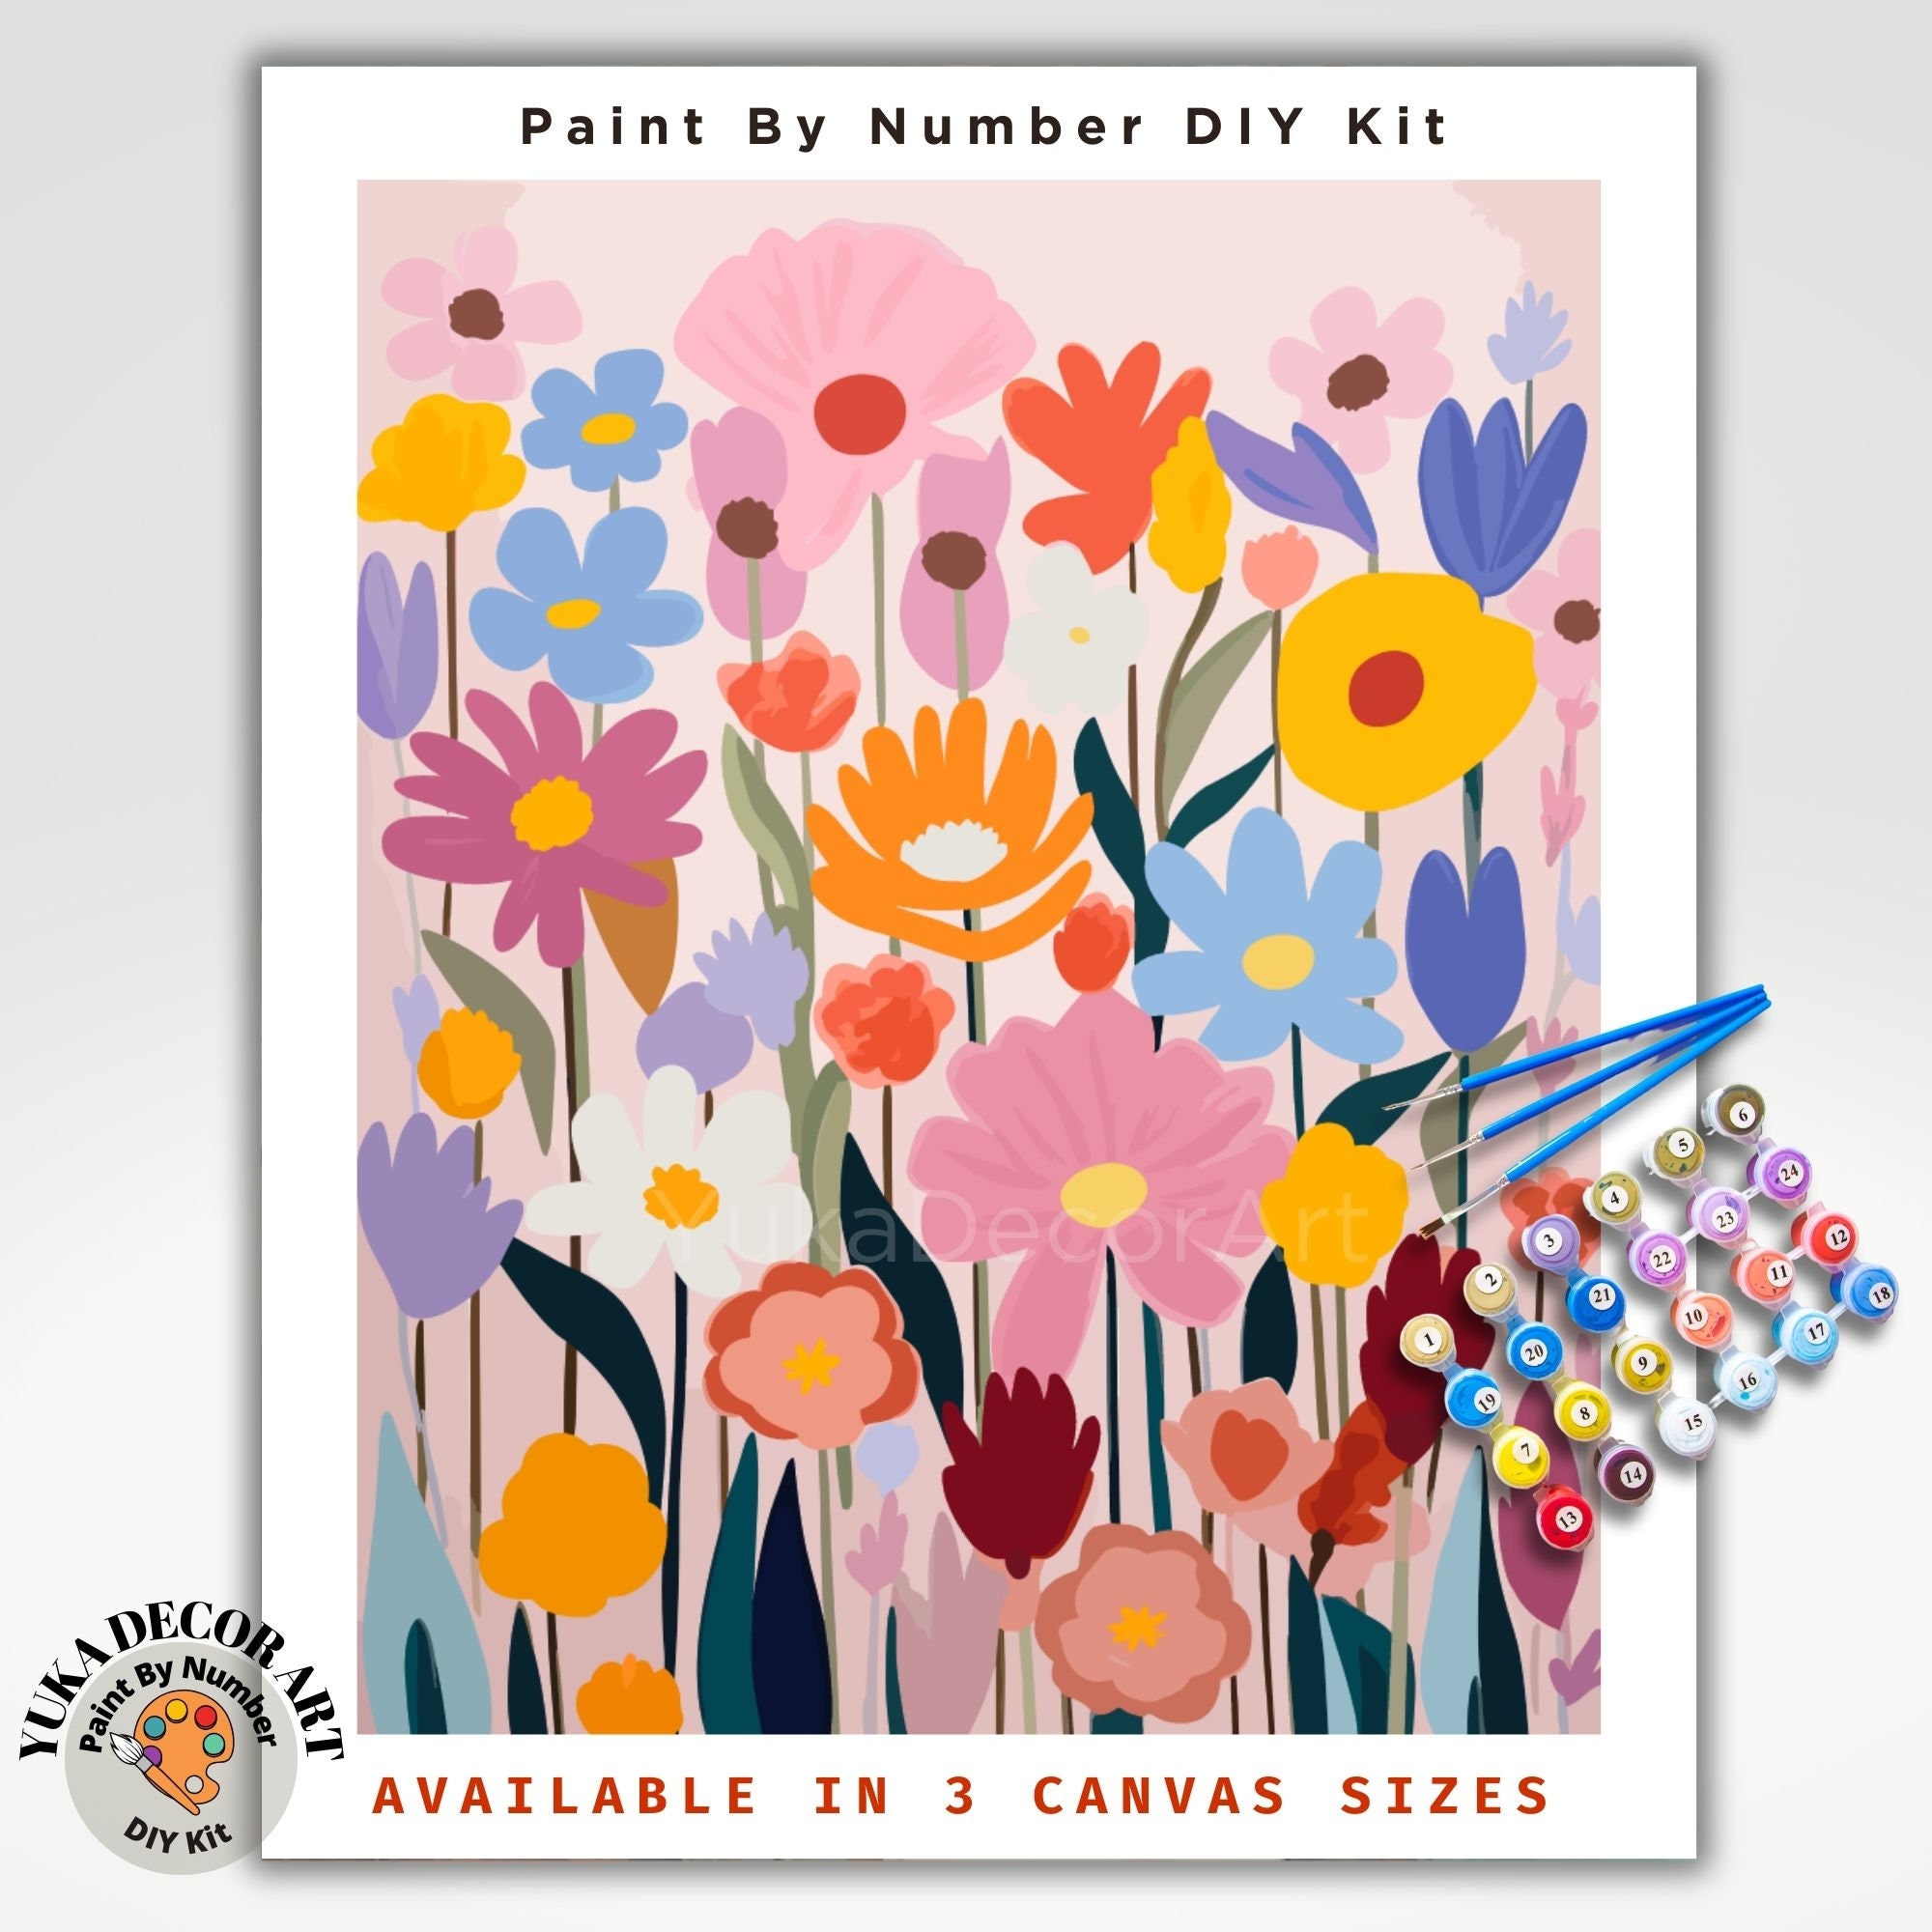 DIY Paint by Numbers Kit for Adults - Perfect Garden